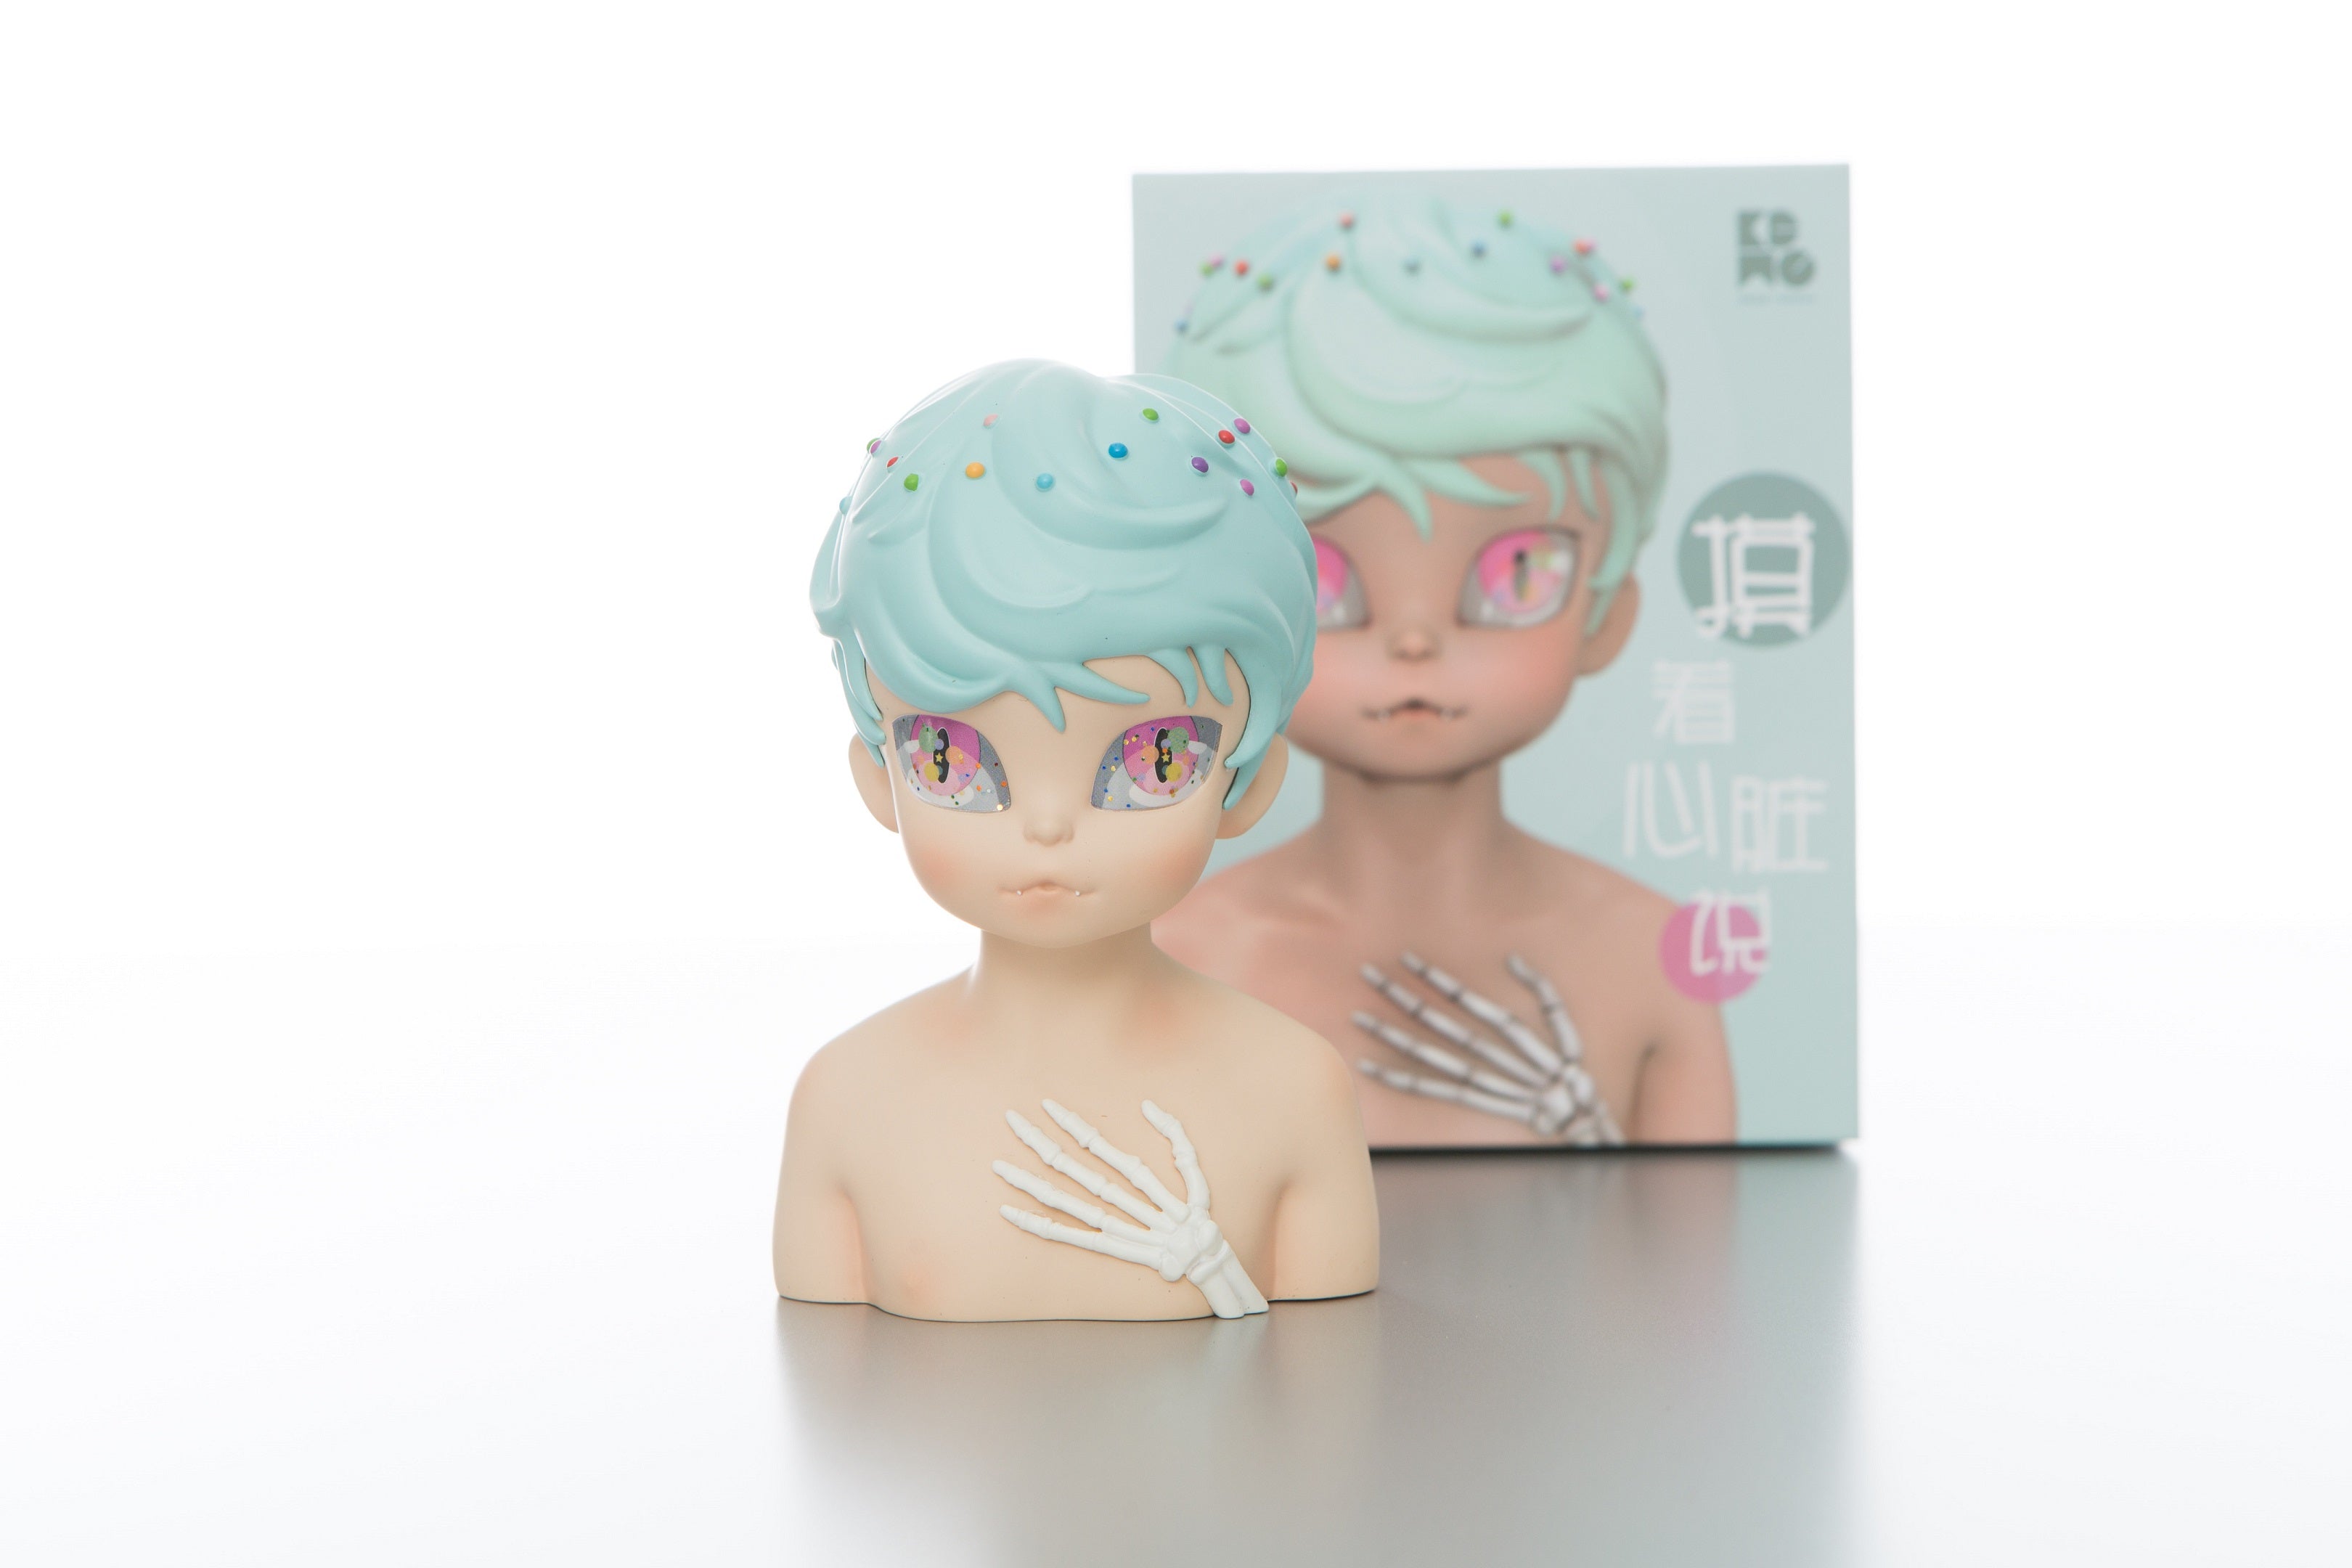 Mini and standard size toy figurines from Wind Rises - Touch My Heart by Keme life.